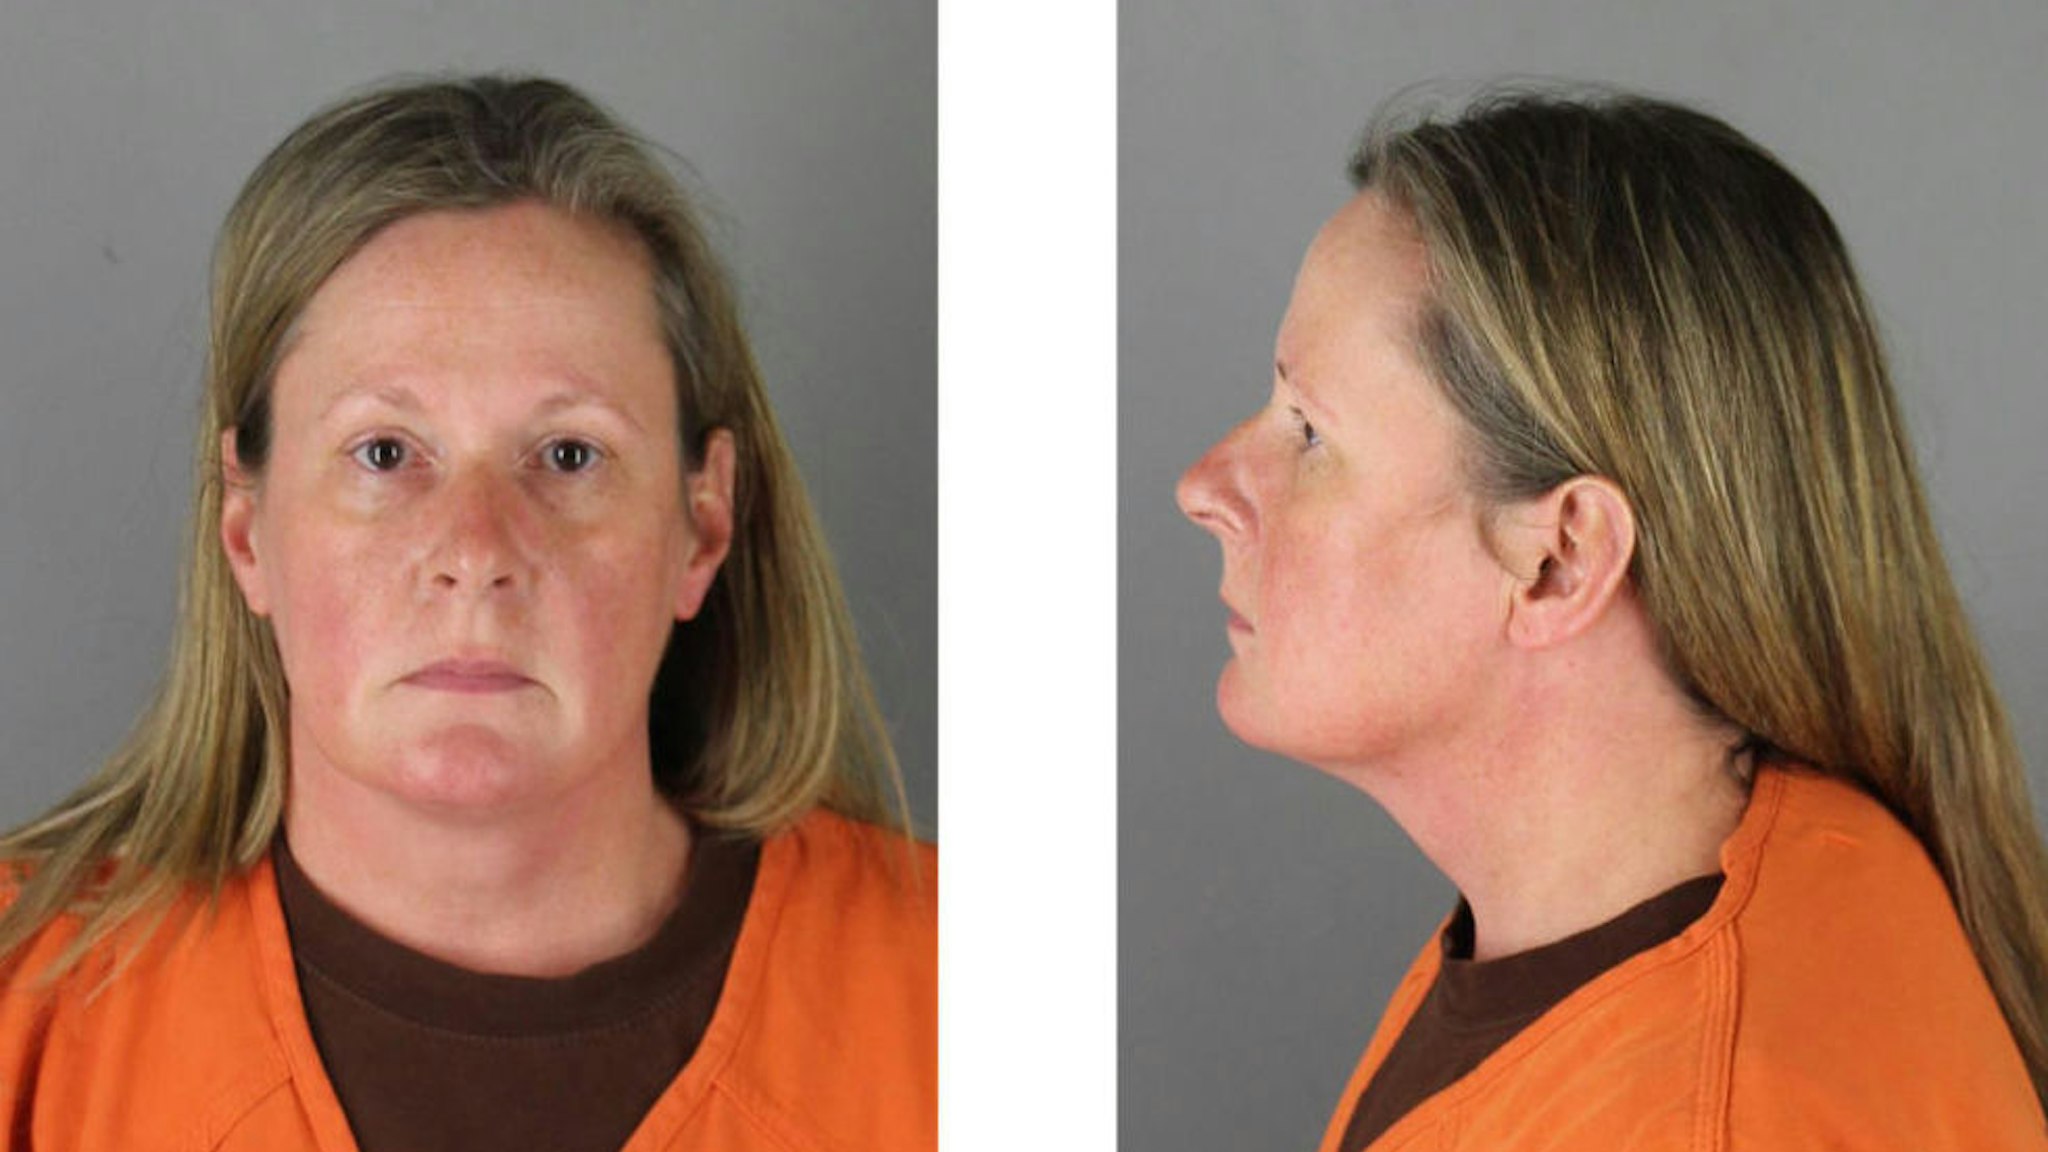 MINNEAPOLIS, MN - APRIL 14: (EDITORS NOTE: Best quality available) In this handout provided by the Hennepin County Sheriff's Office, former Brooklyn Center Police Officer Kim Potter poses for a mugshot at the Hennepin County Jail on April 14, 2021 in Minneapolis, Minnesota. Potter, a 26-year police veteran, was charged with with second-degree manslaughter in the death 20-year-old Daunte Wright who she shot and killed following a traffic stop.